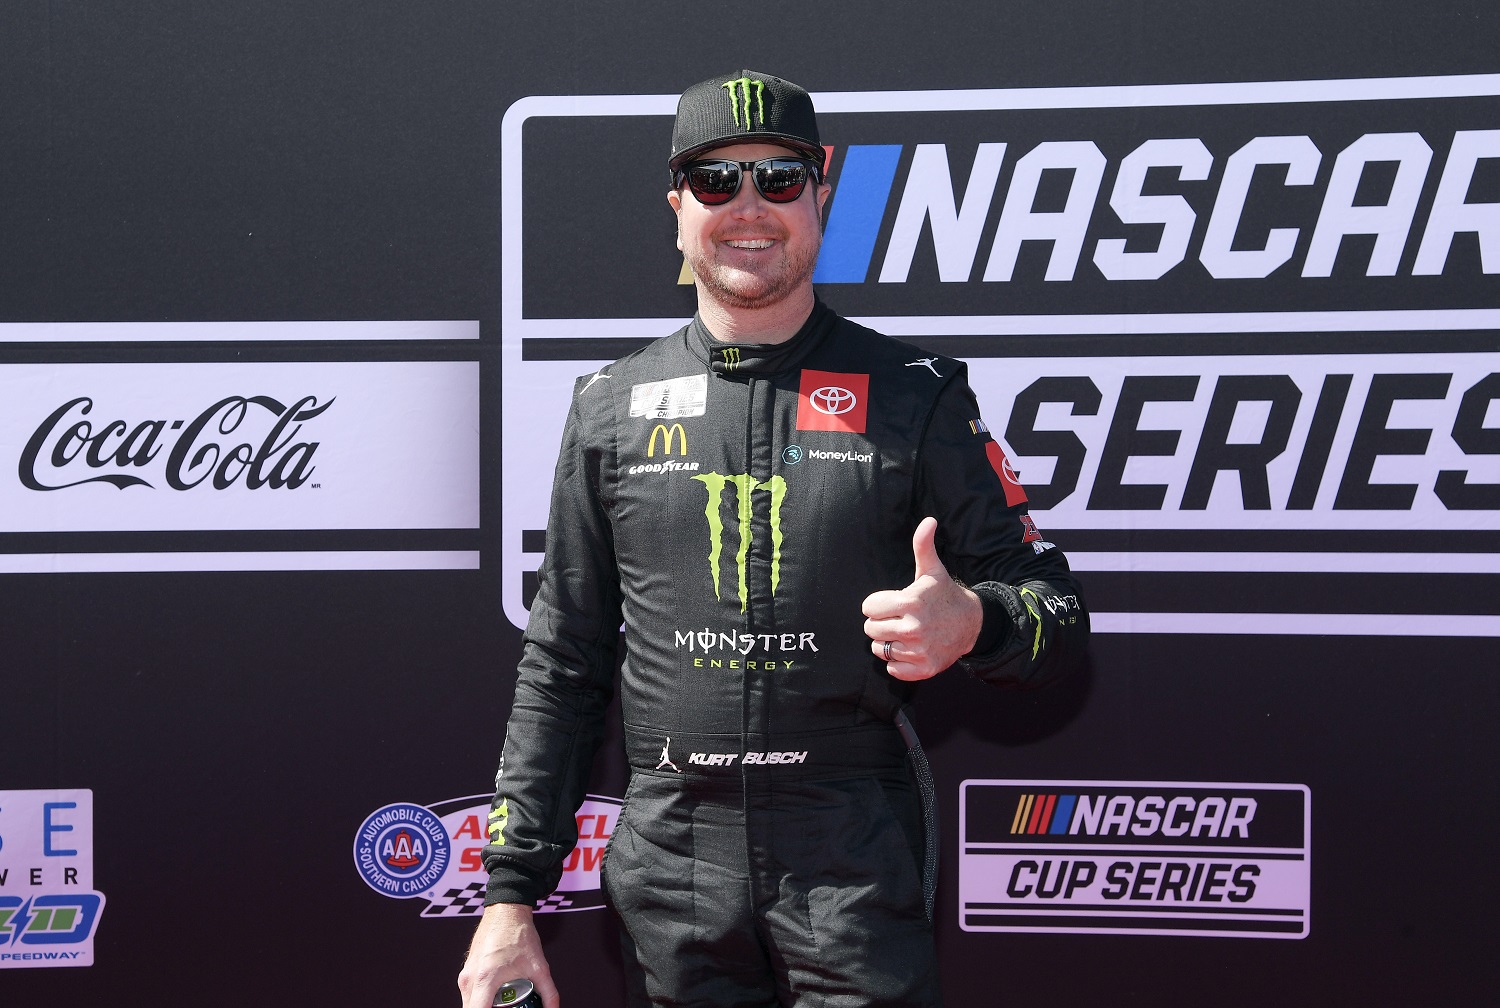 Kurt Busch poses on the red carpet before the start of NASCAR Cup Series Wise Power 400 at the Auto Club Speedway on Feb. 27, 2022, in Fontana, California. | Kevork Djansezian/Getty Images